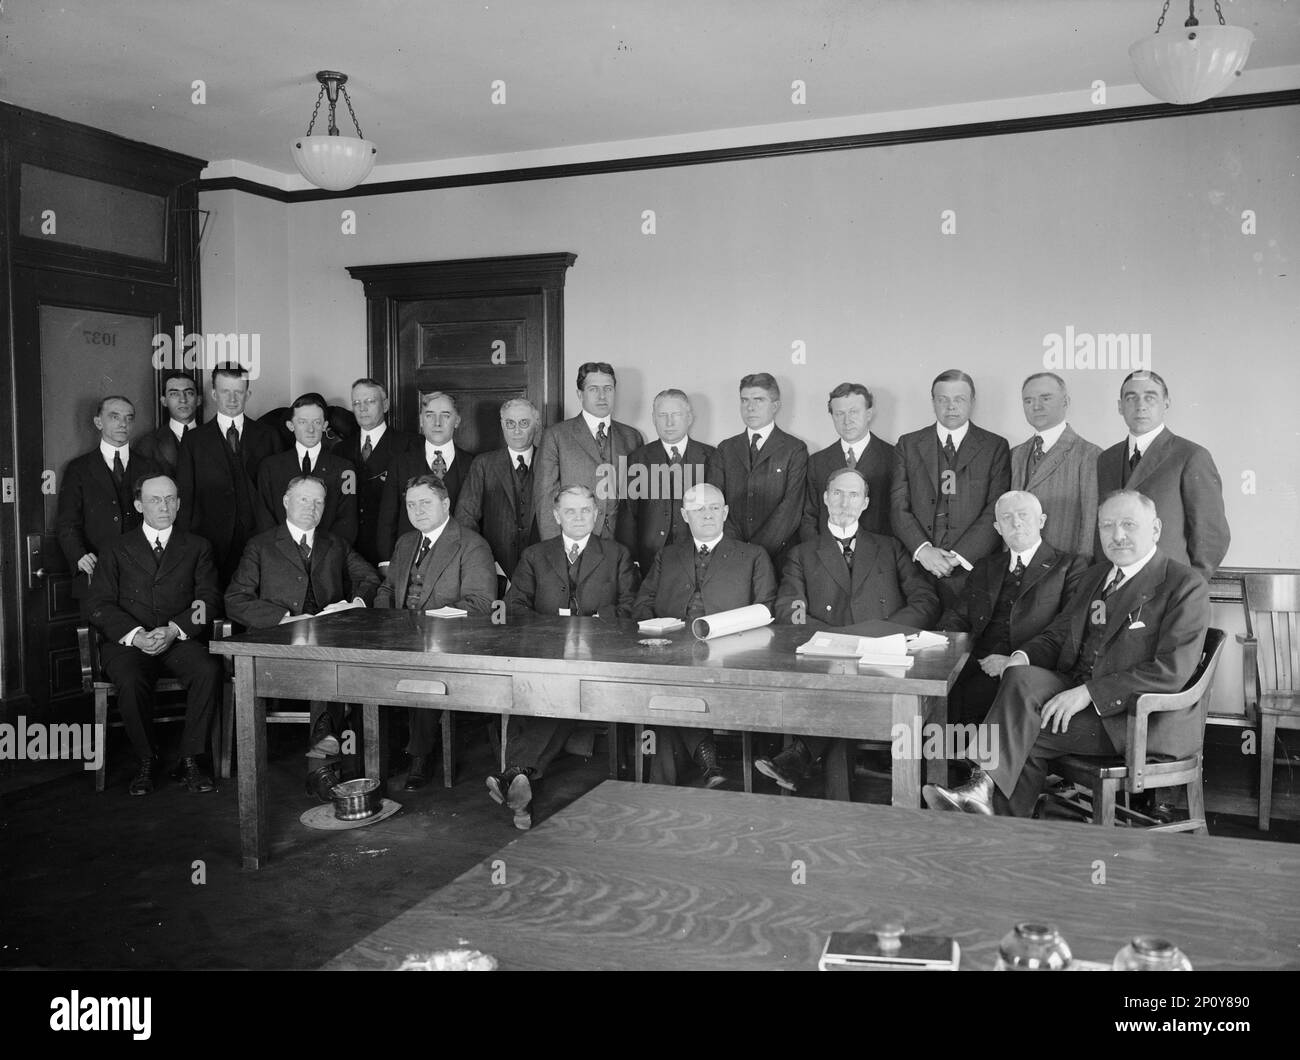 Julius Rosenwald of Sears-Roebuck Co., Supplies Com., Adv. C.N.D., Chairman, 1917. American businessman and philanthropist; part-owner and leader of Sears, Roebuck and Company. Rosenwald is far right, front row. Stock Photo